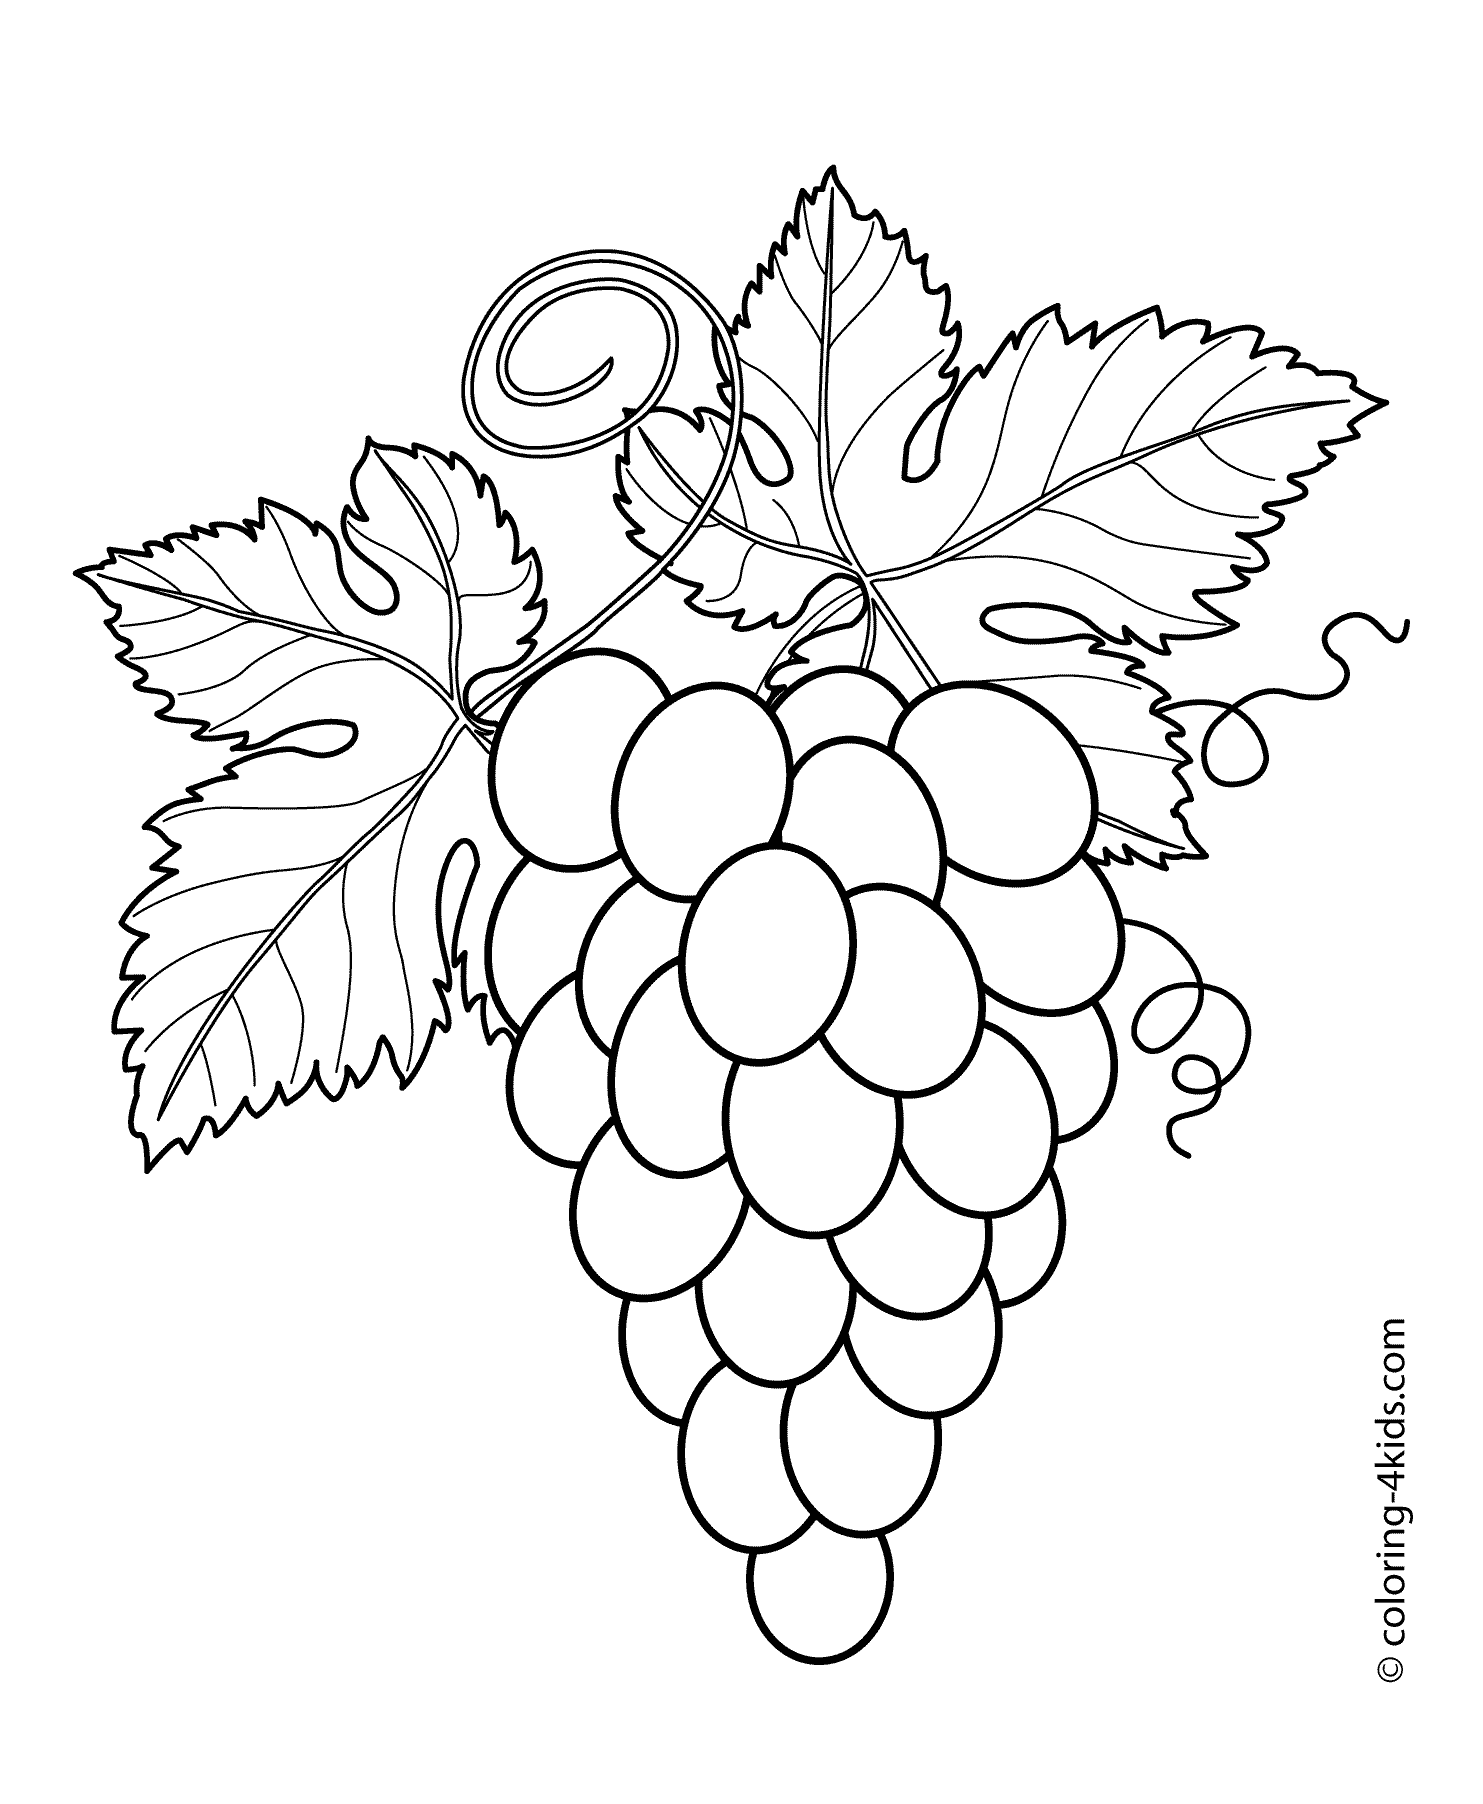 Free Grapes Drawing, Download Free Grapes Drawing png images, Free